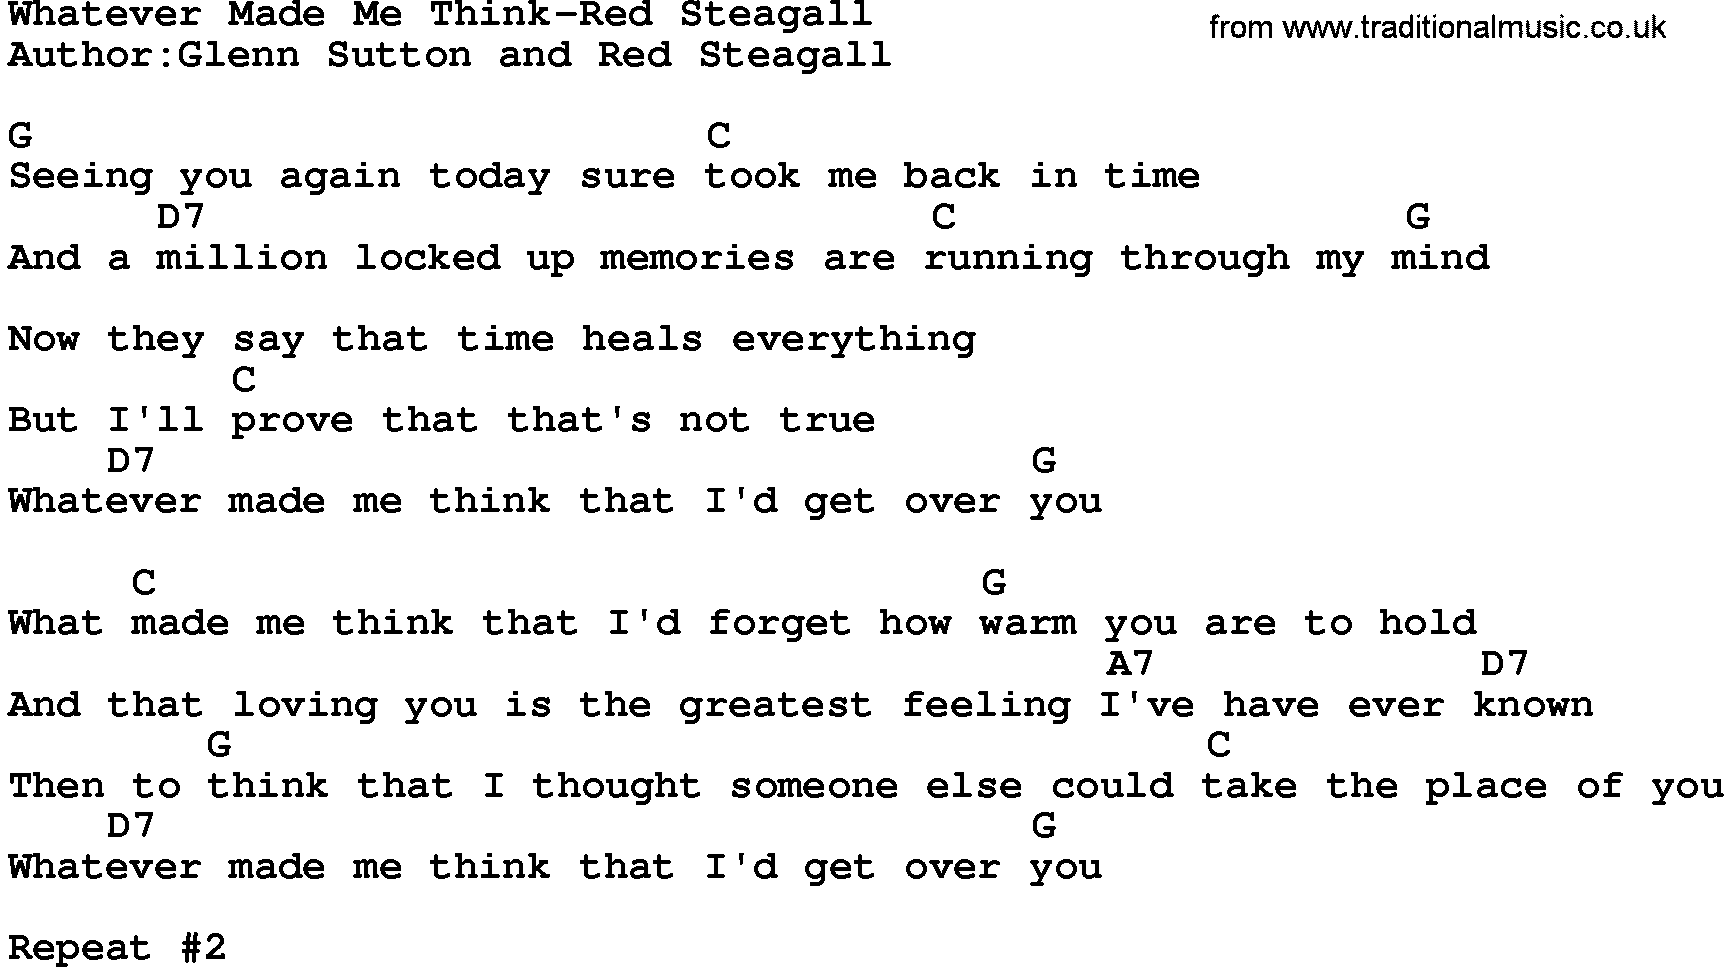 Country music song: Whatever Made Me Think-Red Steagall lyrics and chords